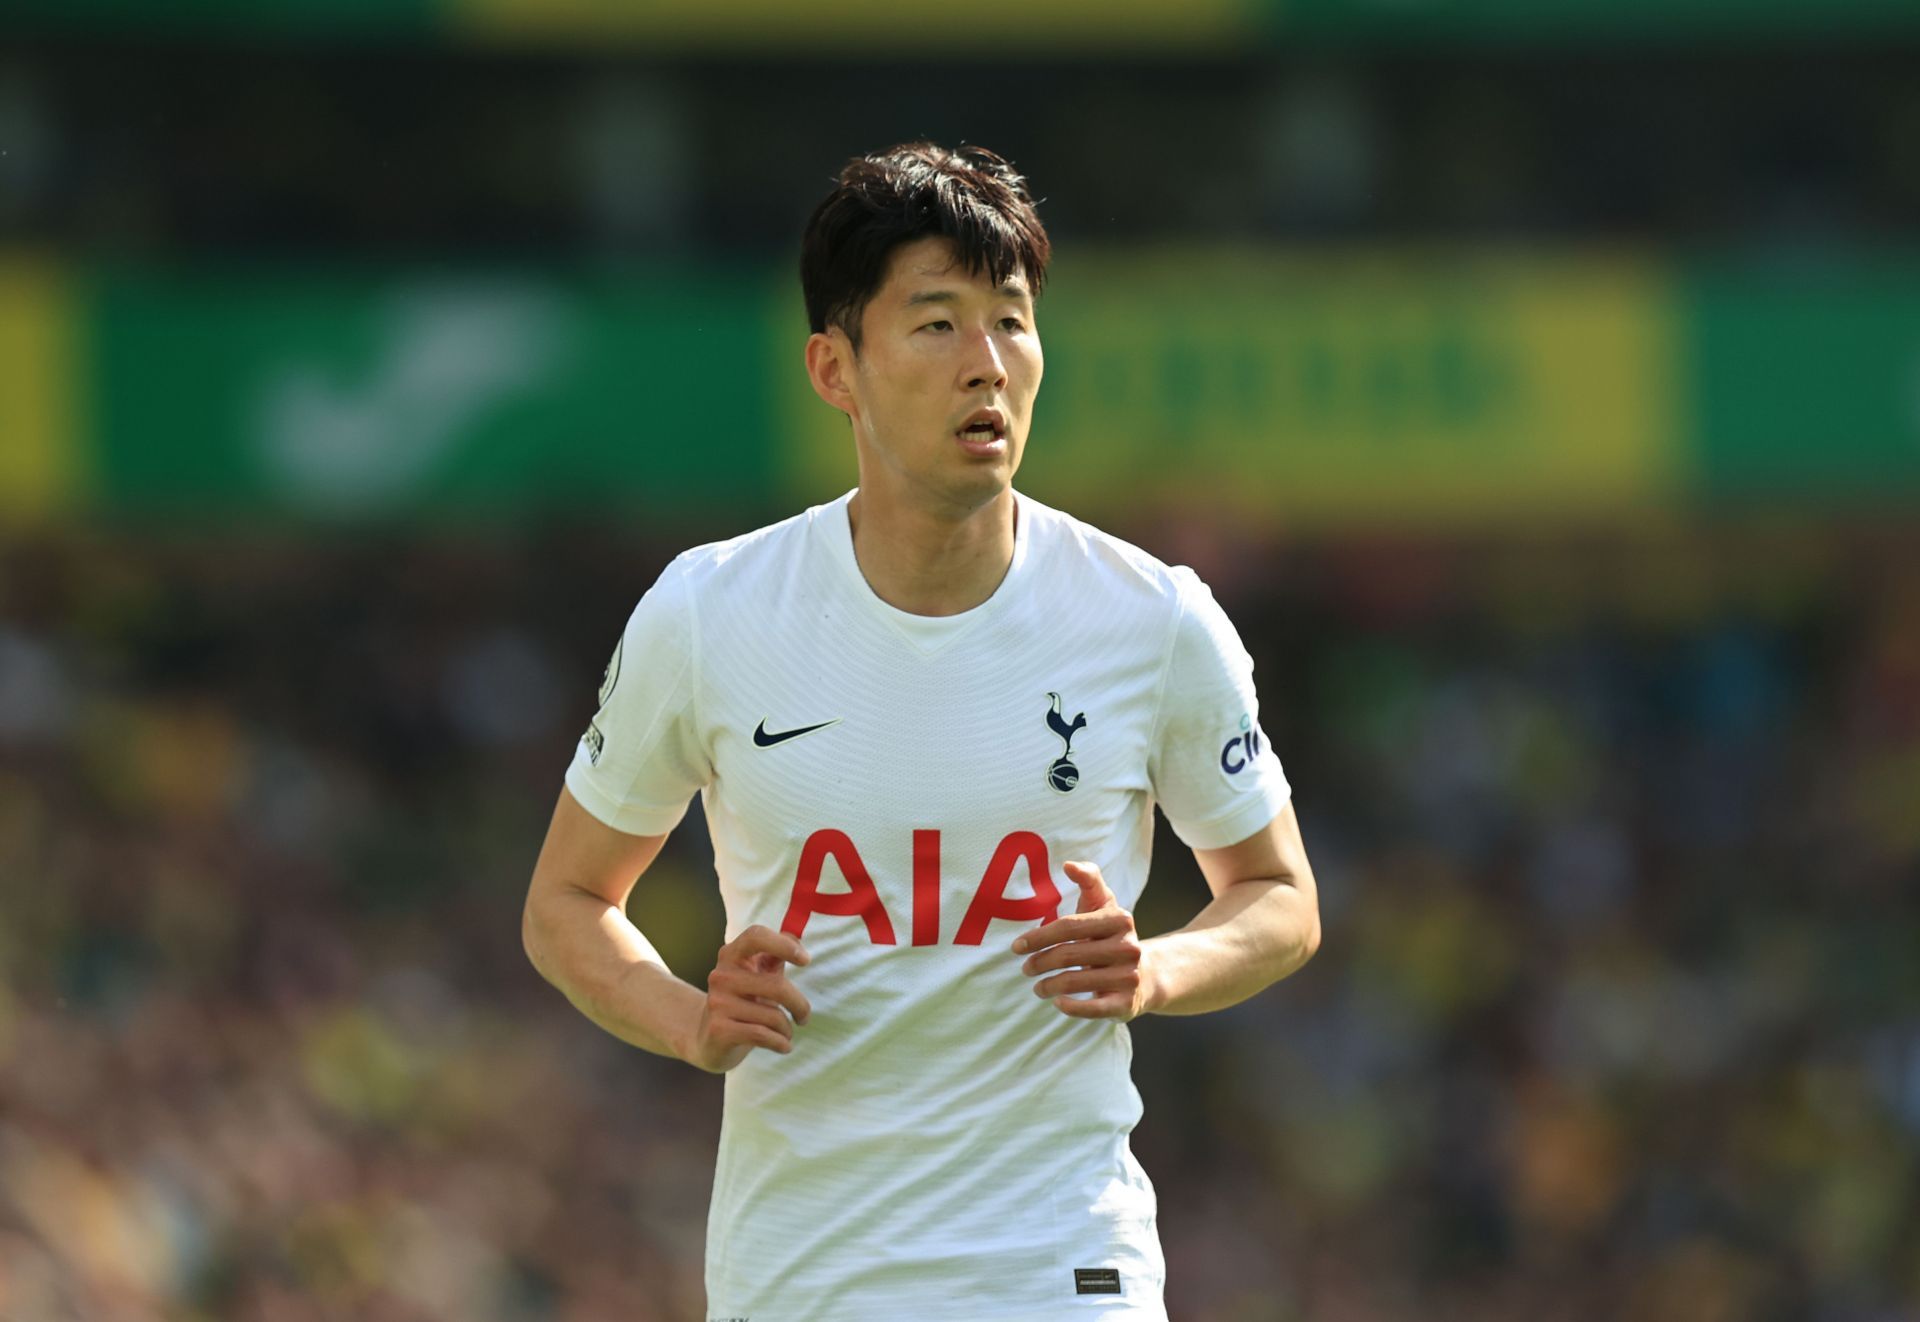 Son Heung-min enjoyed a good season with the Spurs